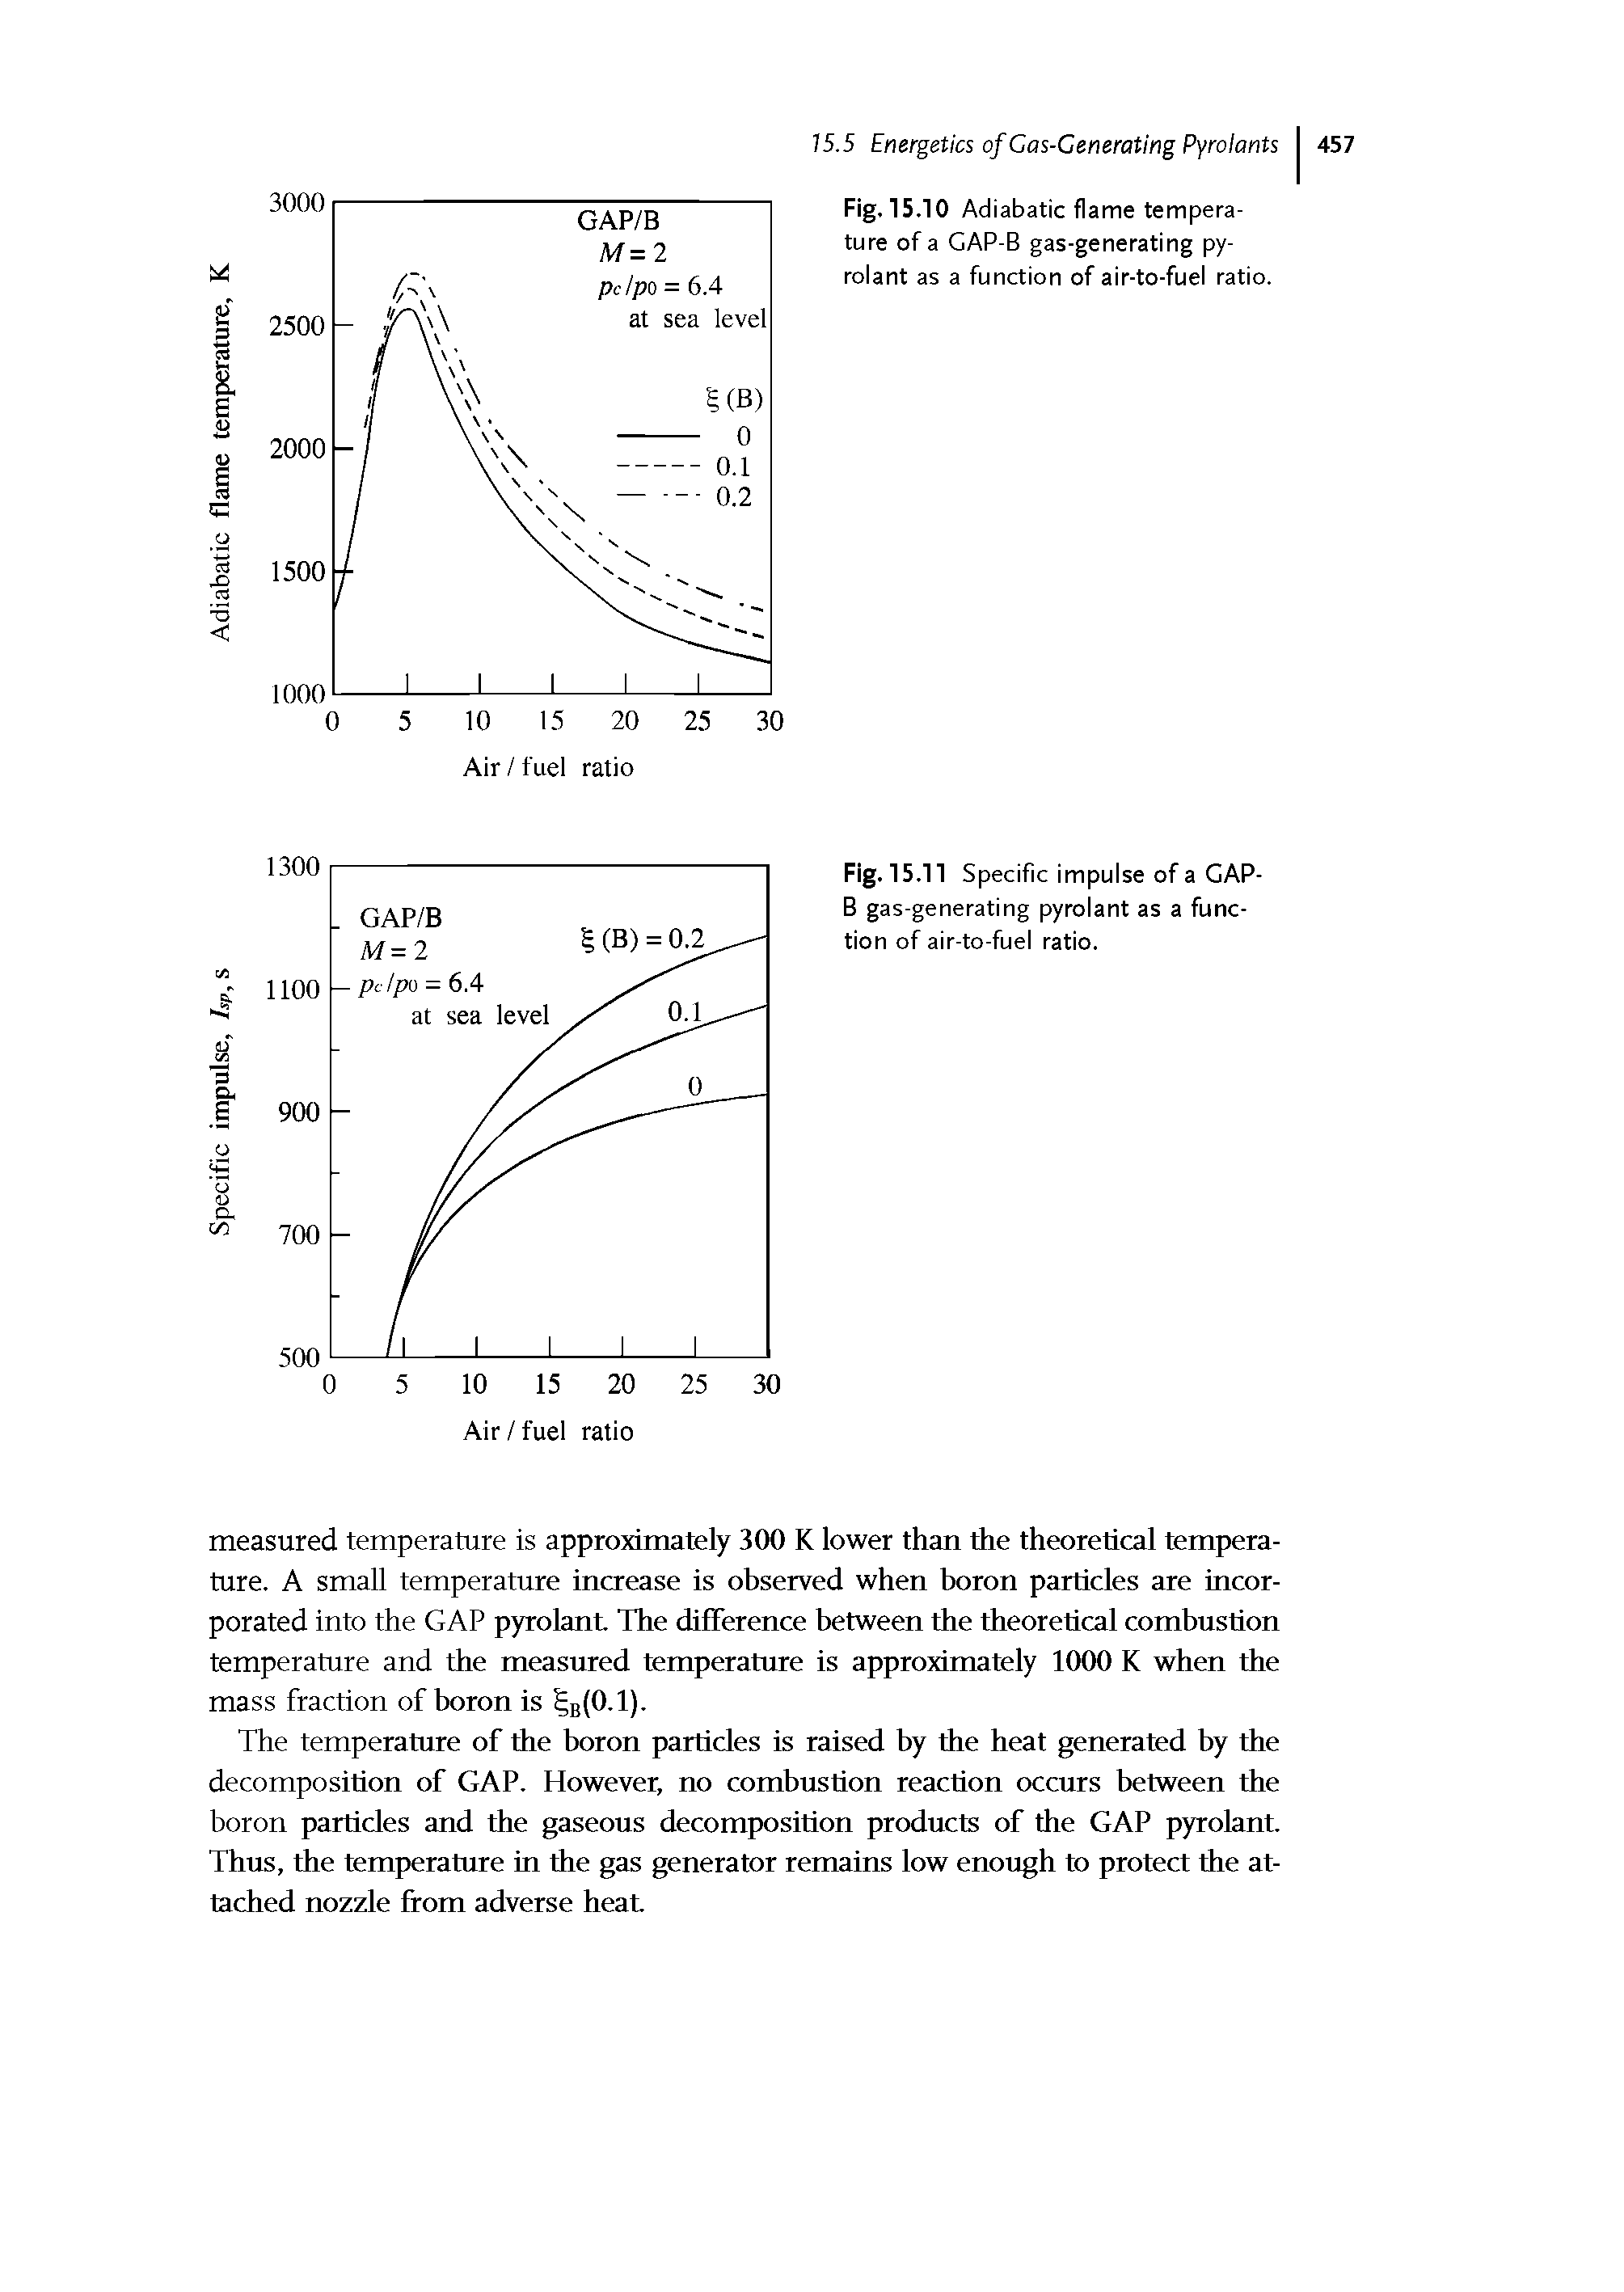 Fig.15.11 Specific impulse of a GAP-B gas-generating pyrolant as a function of air-to-fuel ratio.